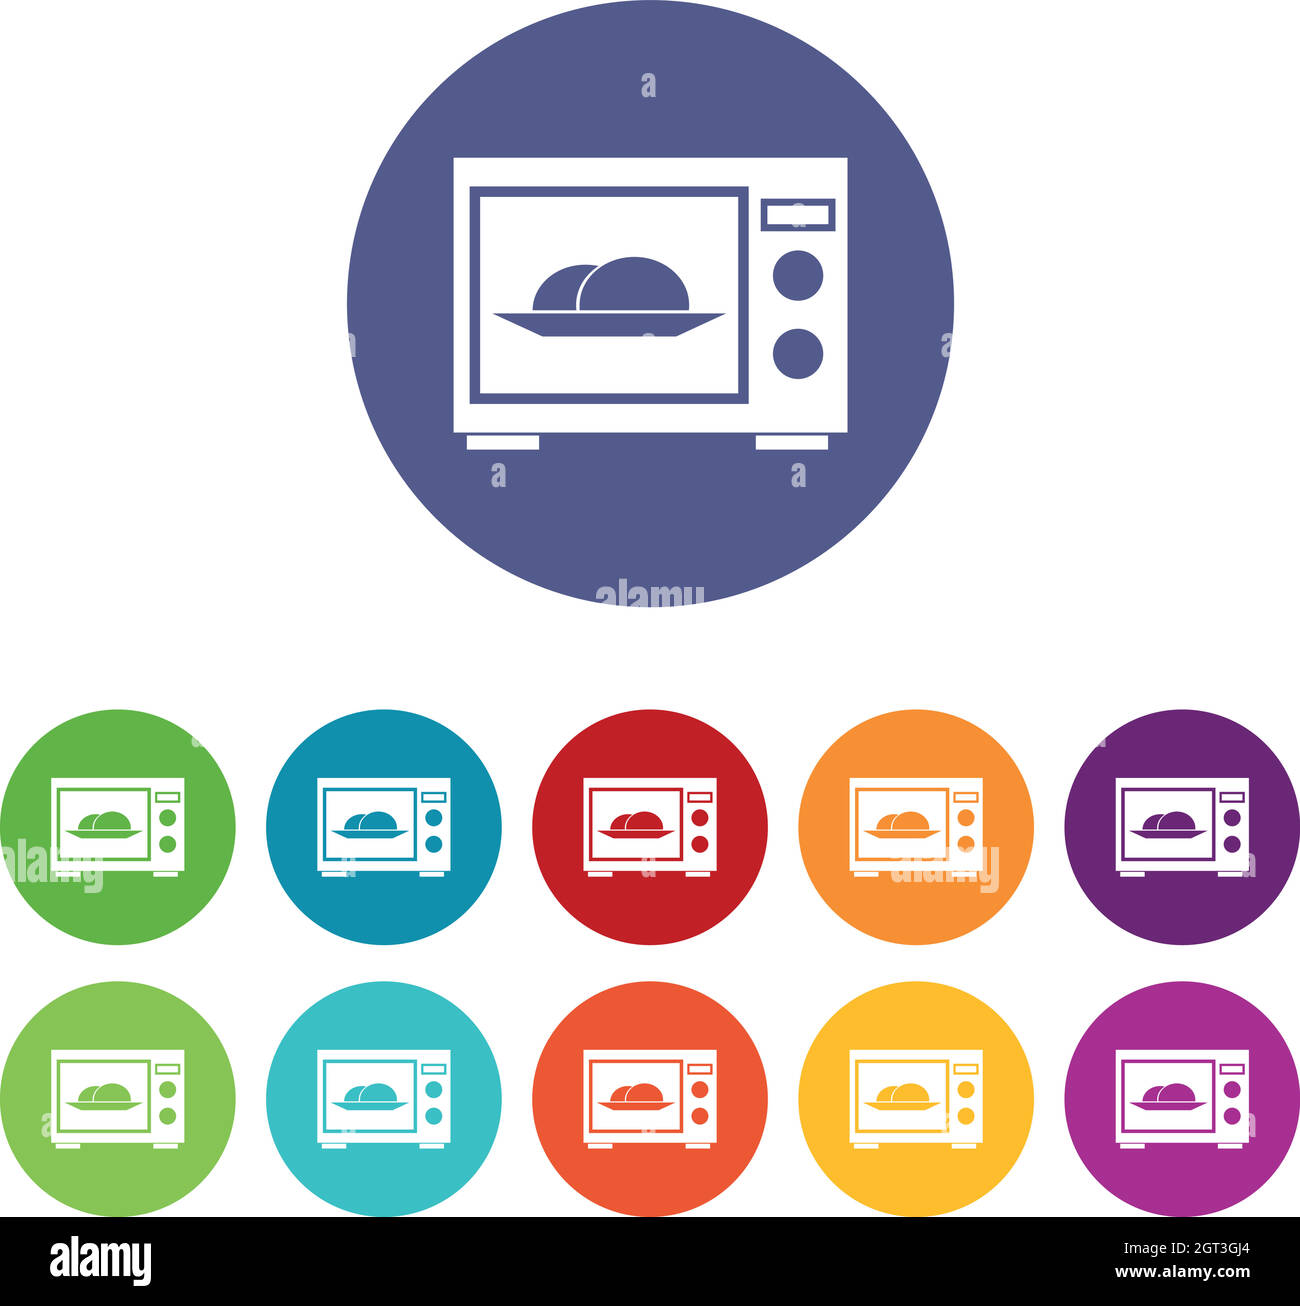 Microwave set icons Stock Vector